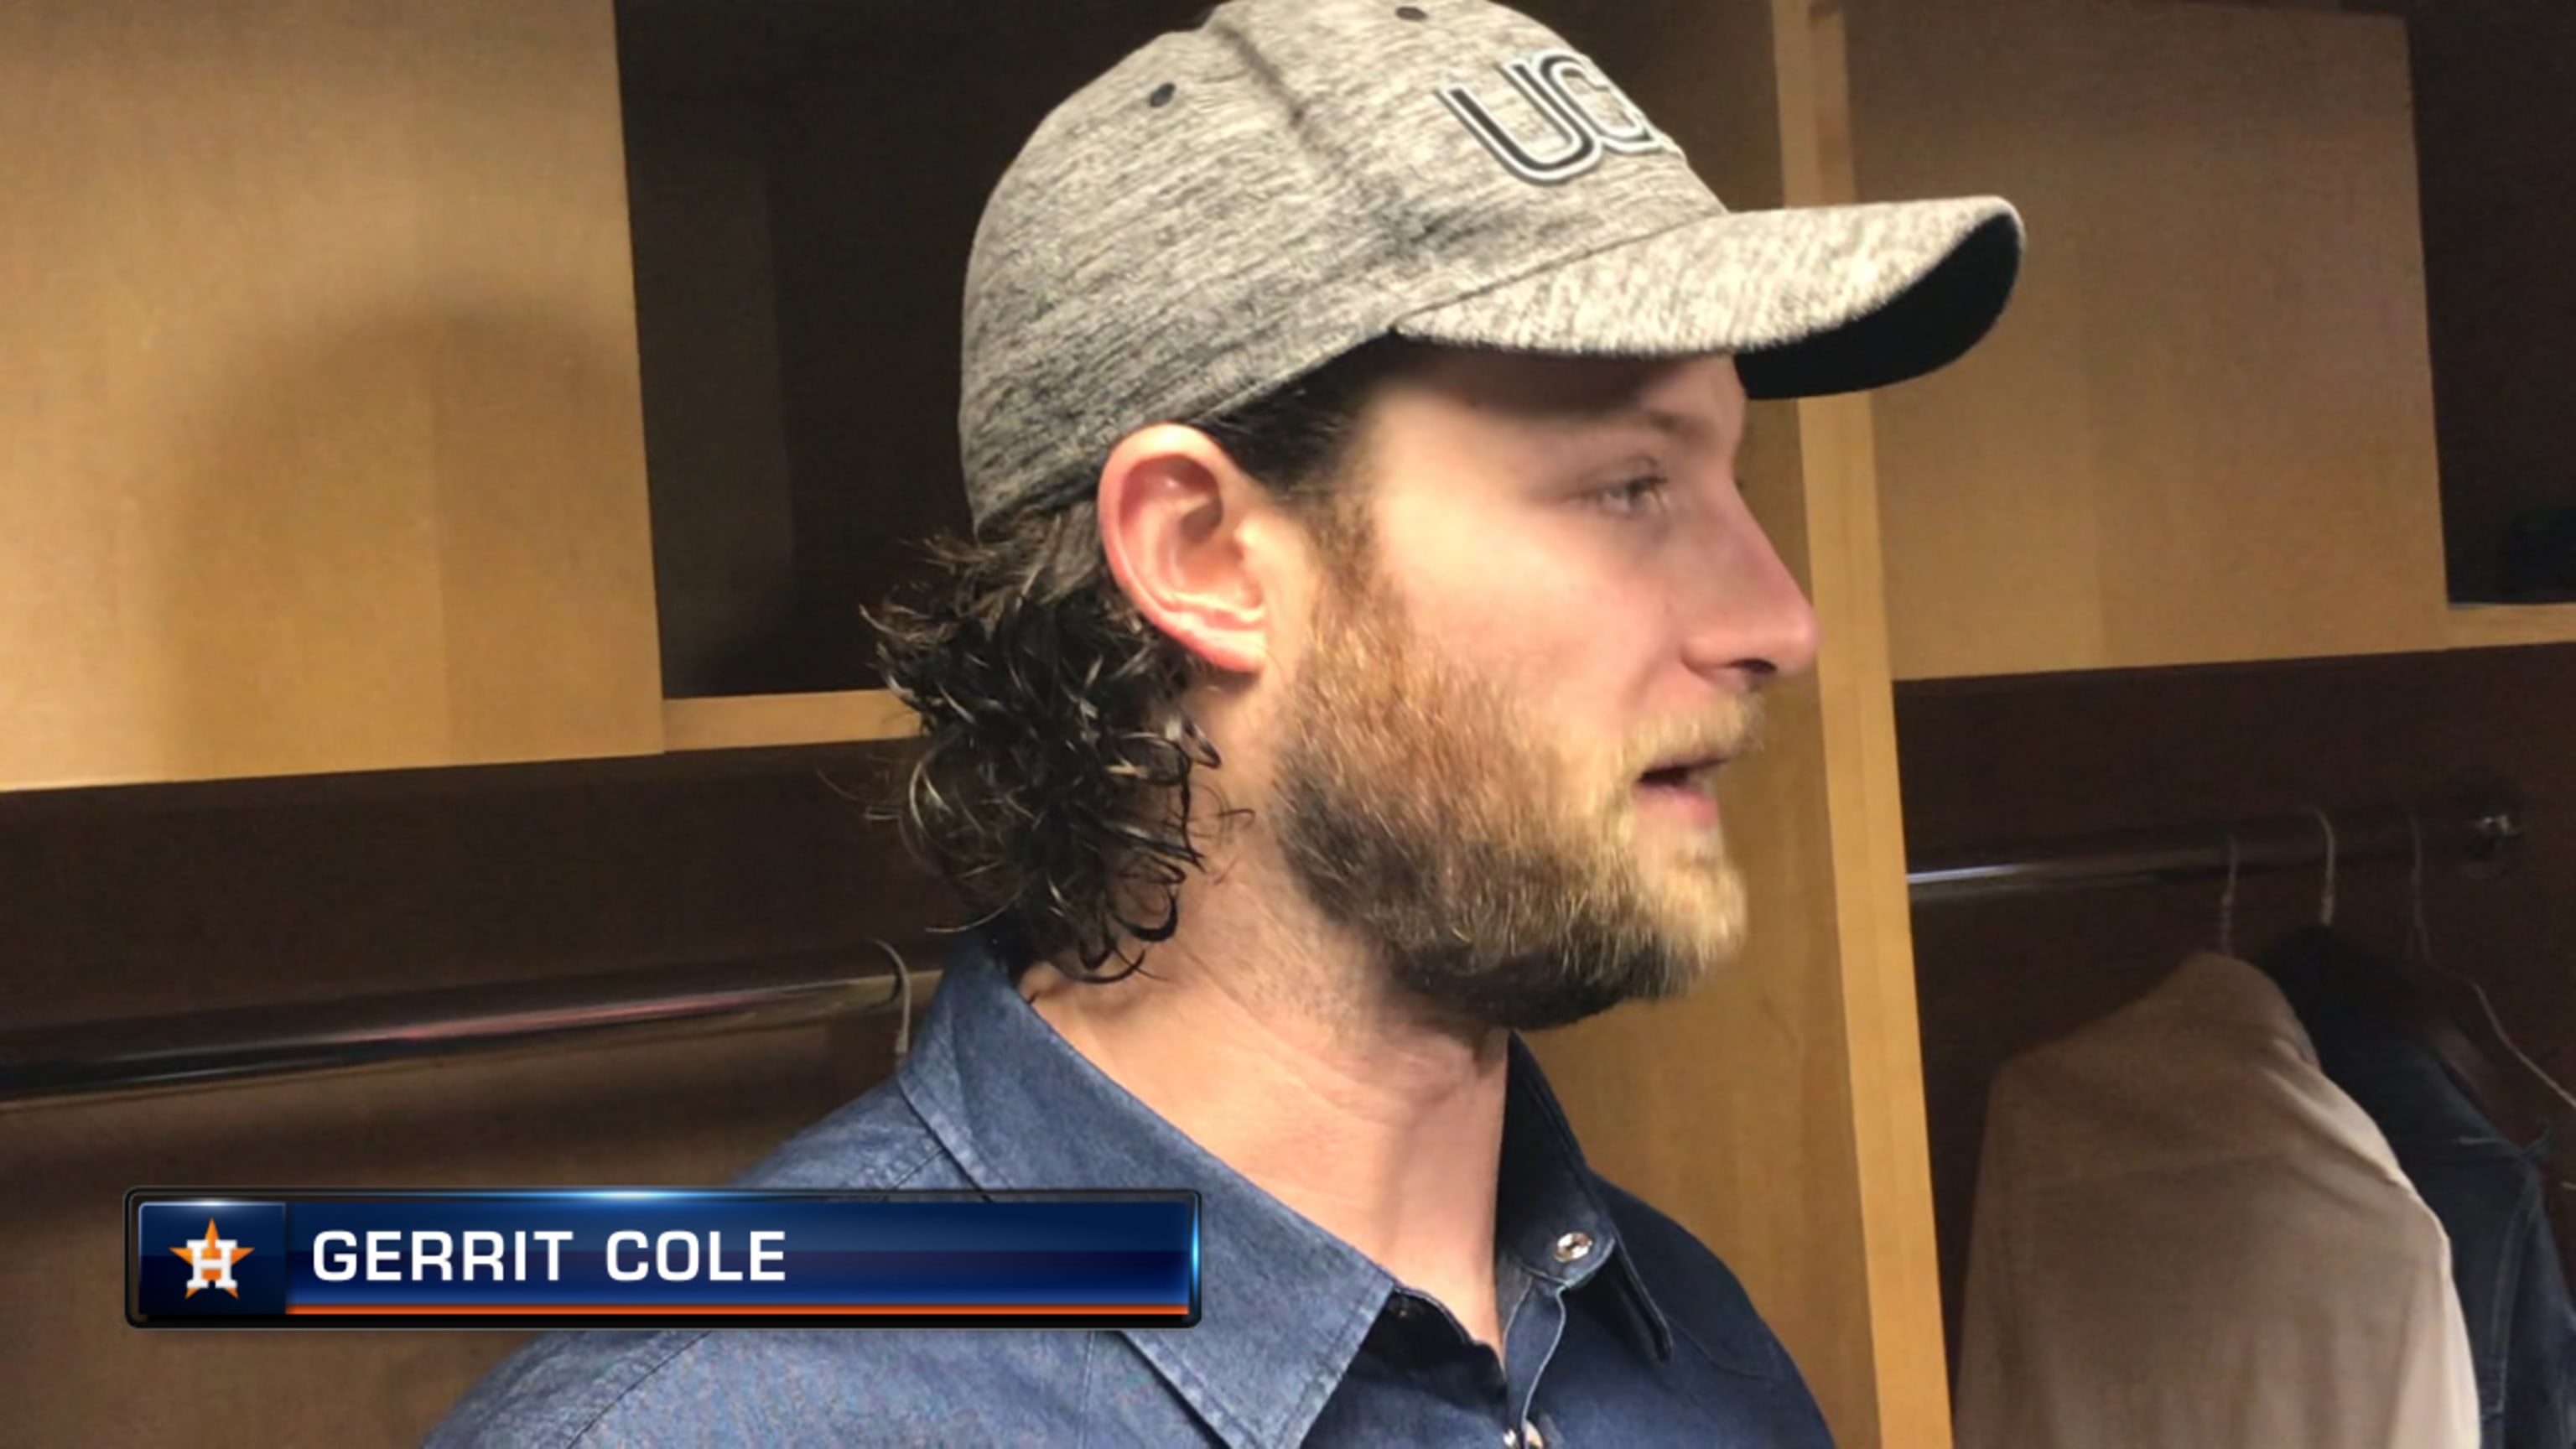 Astros' Gerrit Cole has INSANE start (8 IP, 2 H, 1 R, 10 K) to end